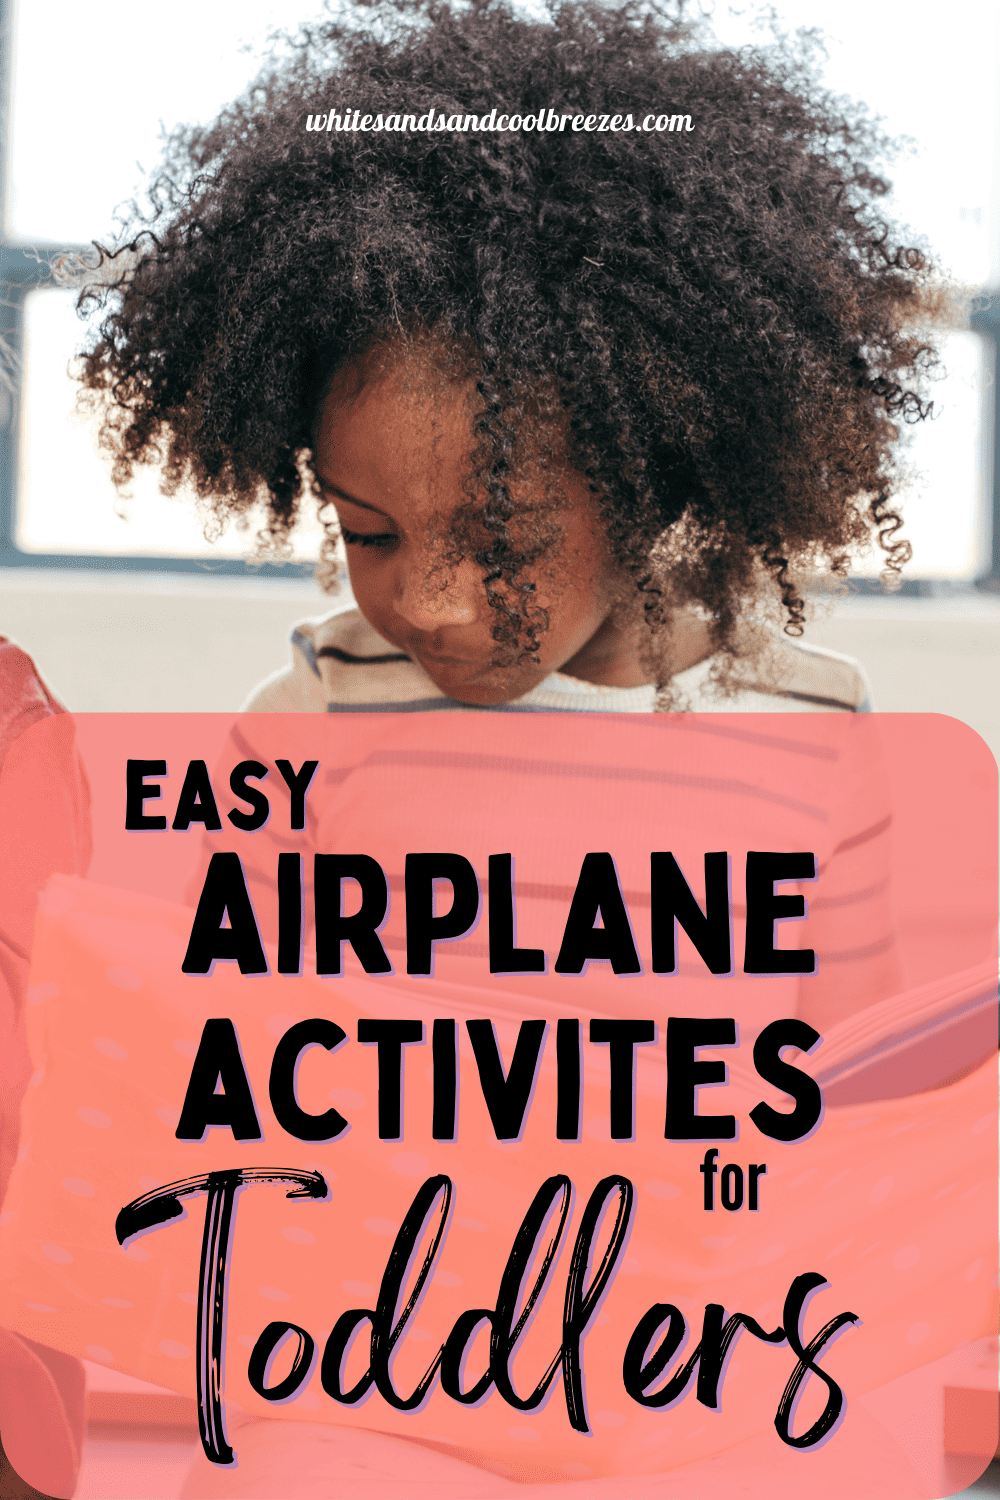 10 Easy Airplane Activities for Toddlers